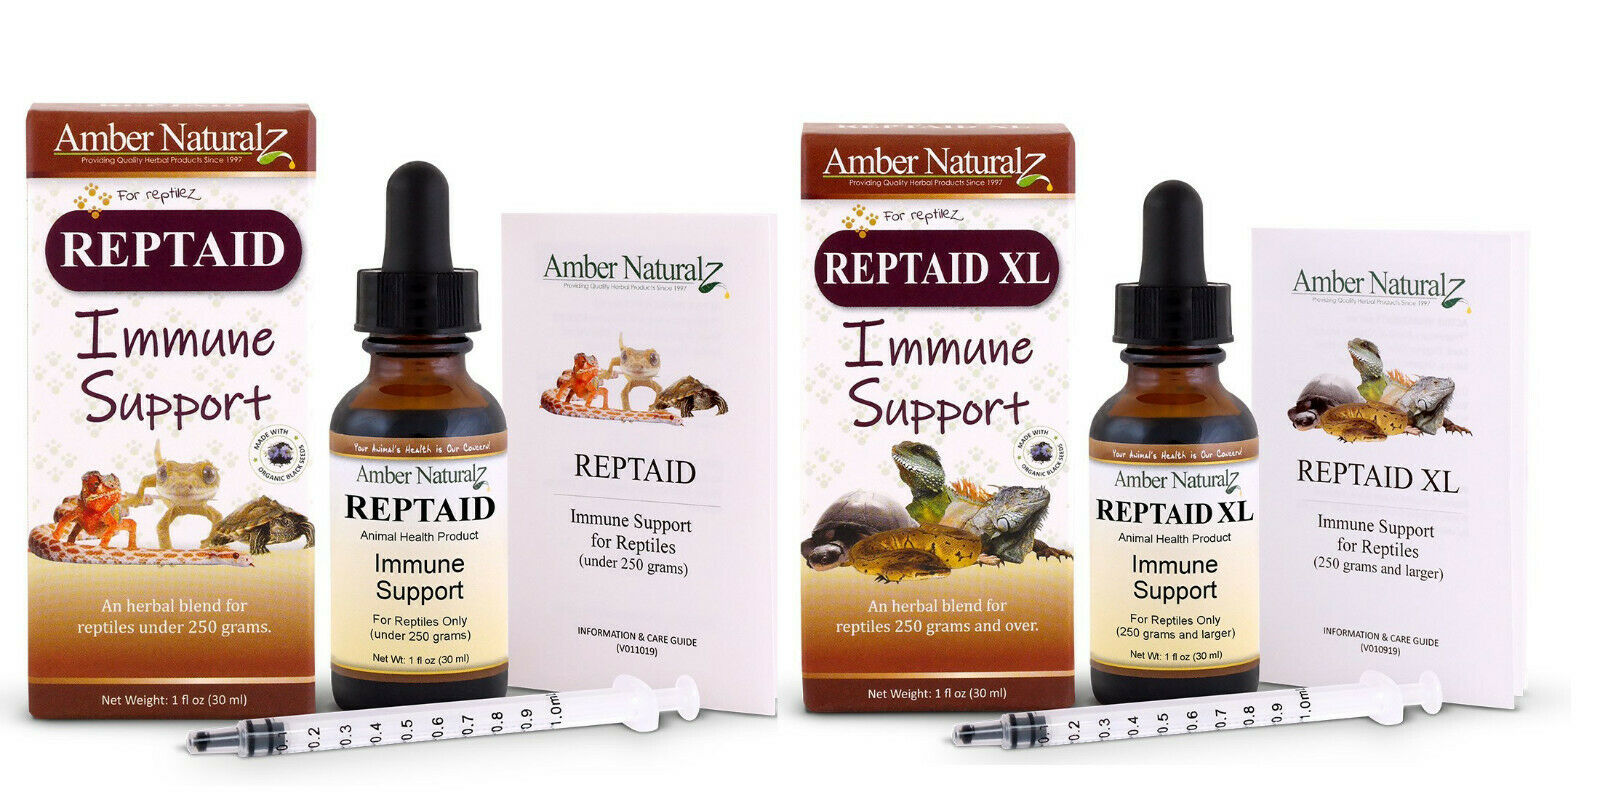 Amber Naturalz Reptaid & Reptaid XL Organic Reptile Immune Support 1oz FREE 2Day